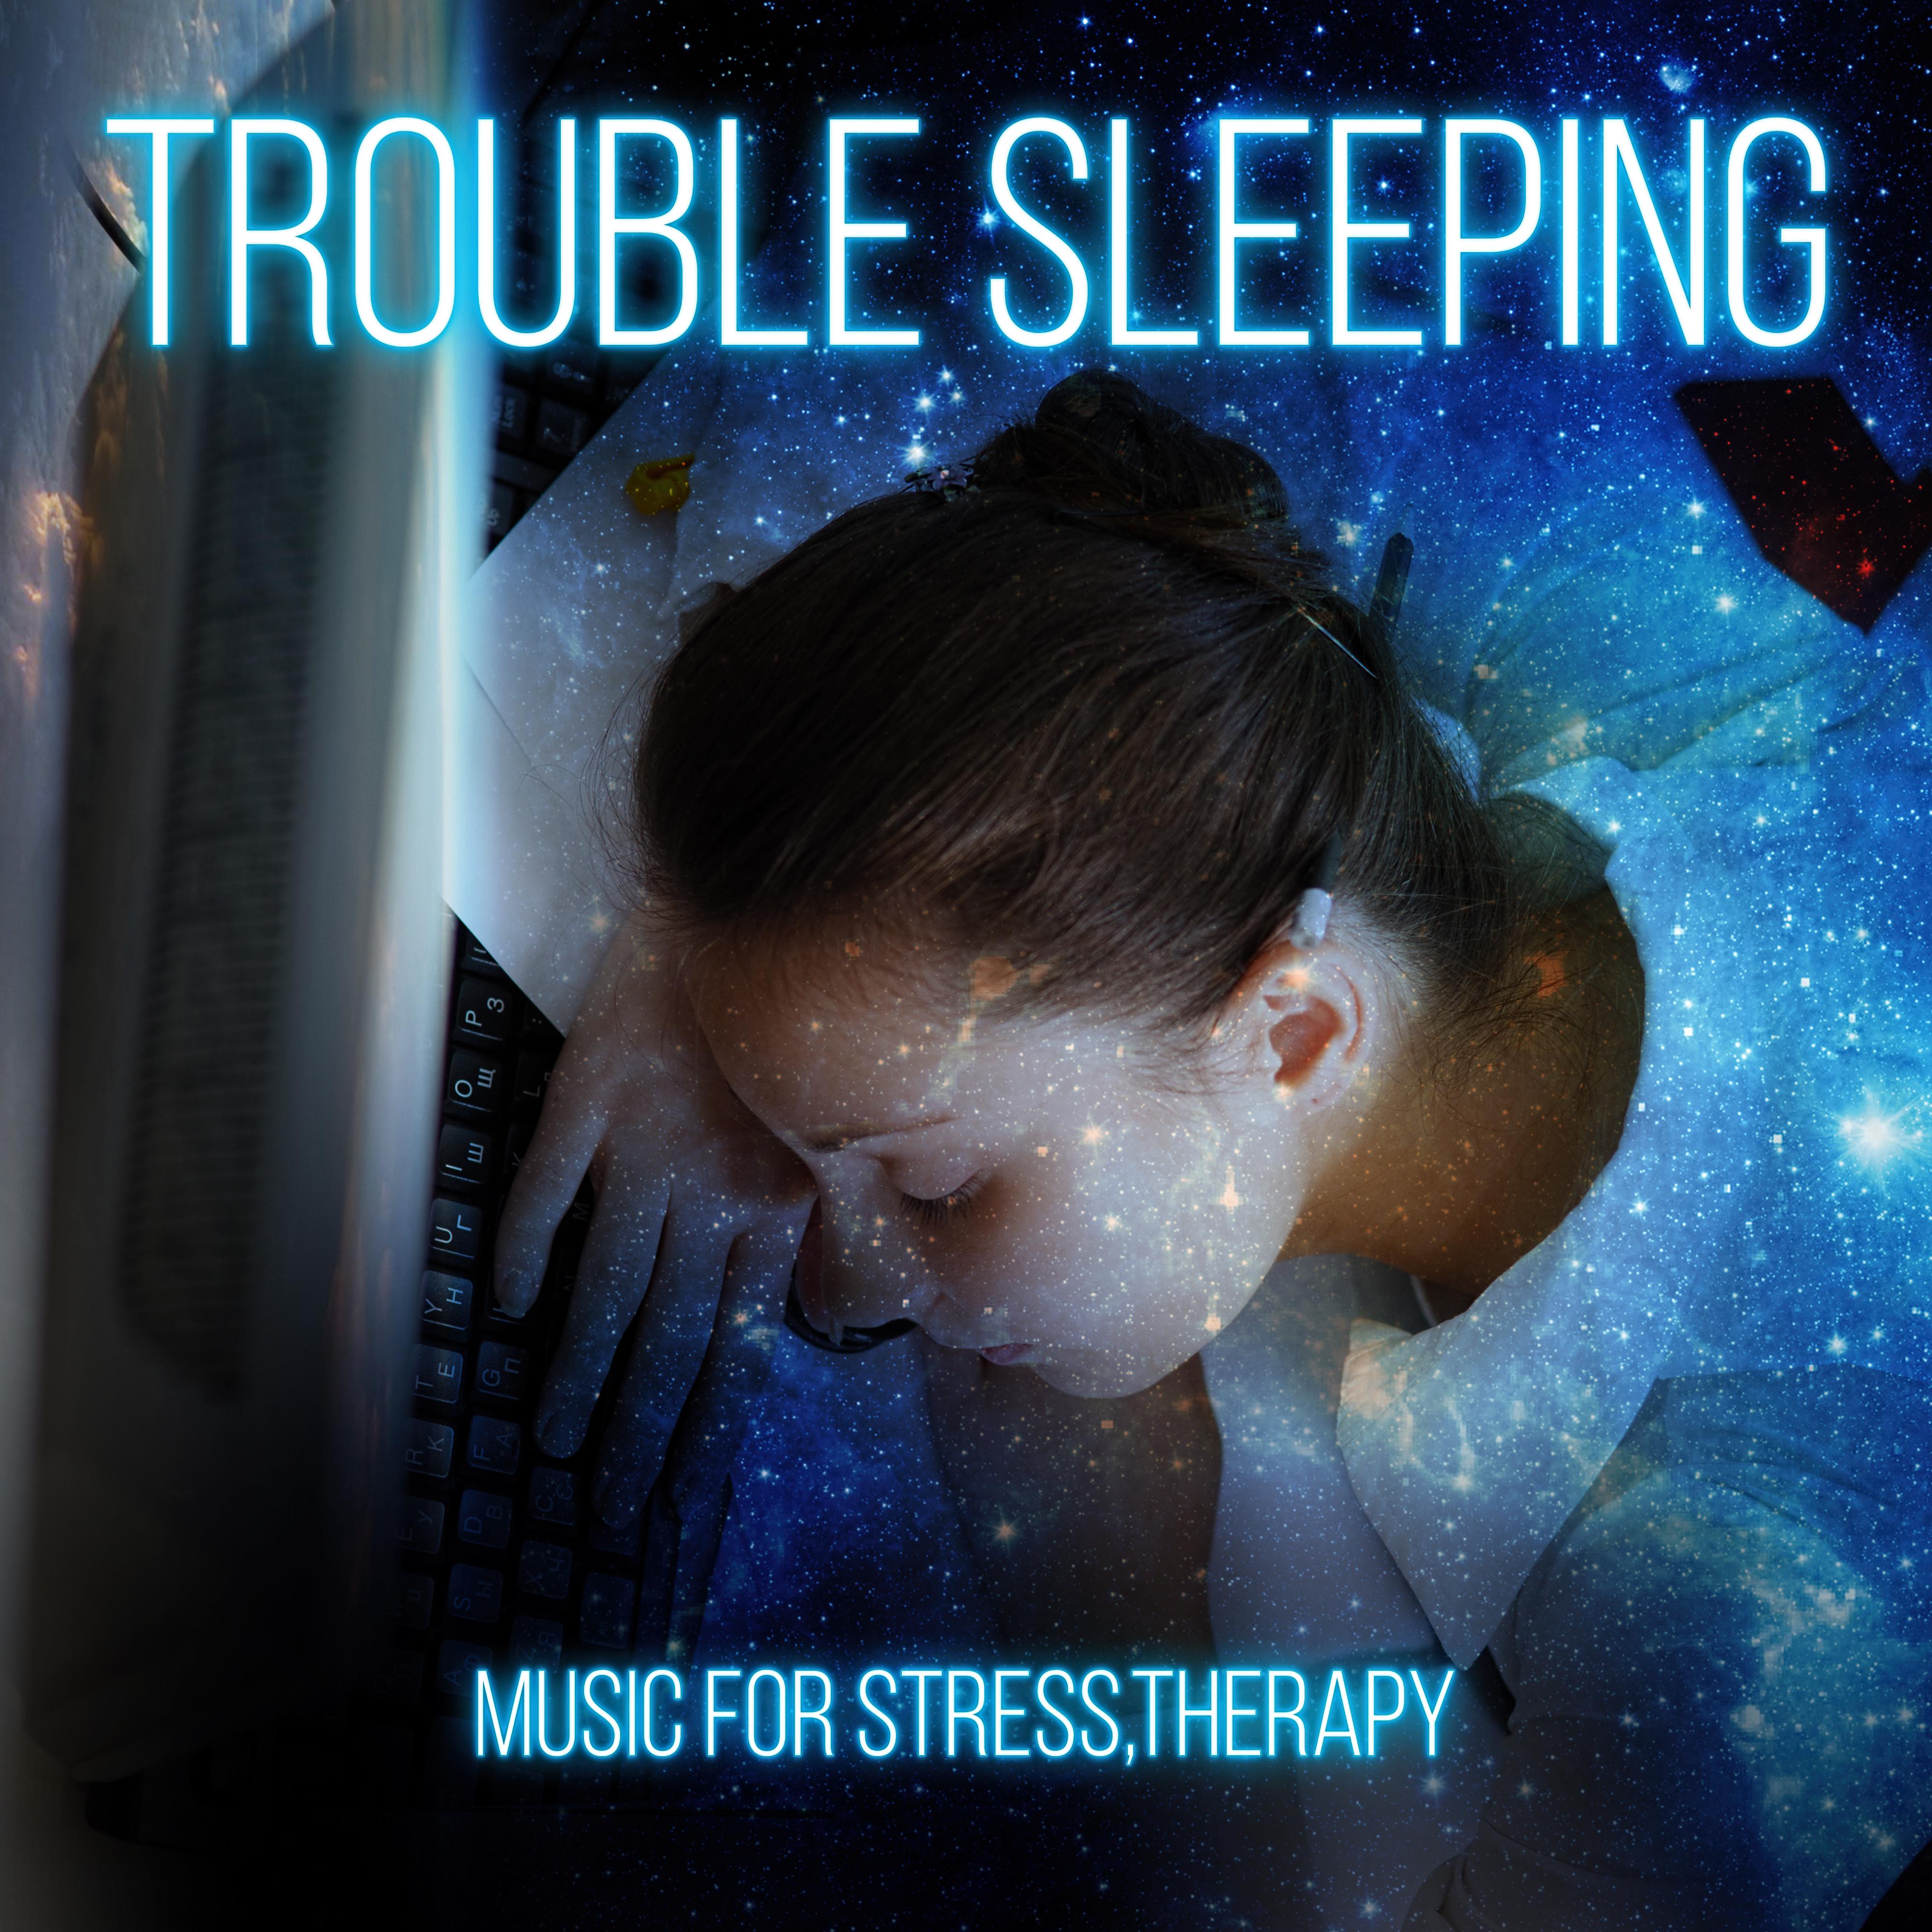 Trouble Sleeping - Music for Stress Relief, Therapy Music with Nature Sounds, Gentle Music for Restful Sleep, Mind and Body Harmony, Calming Music, Relaxing Background Music